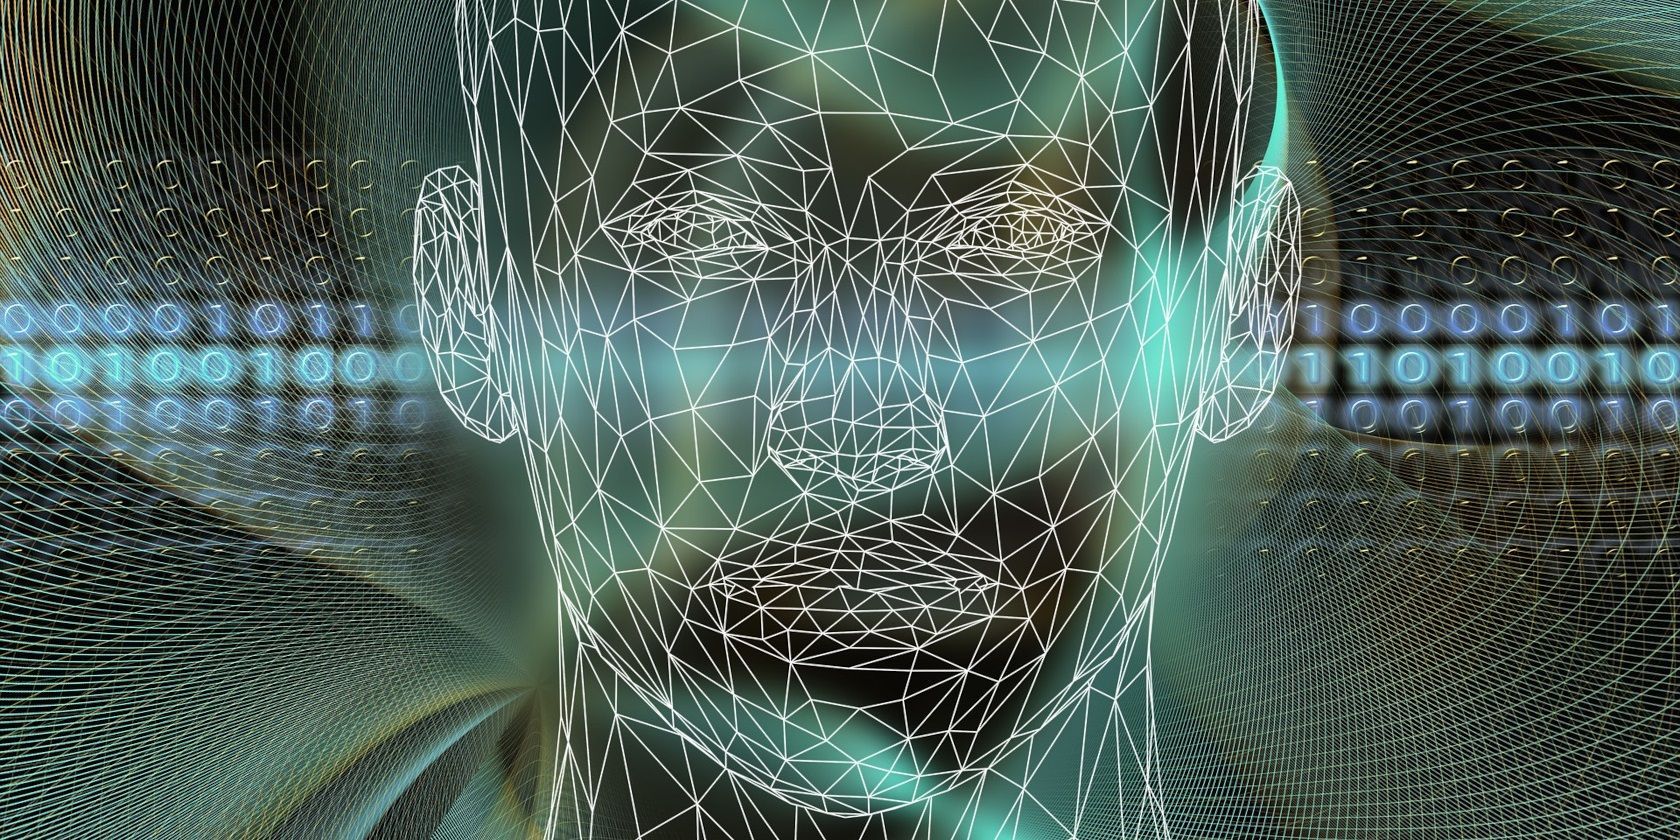 A wireframe illustration of a human head with binary numbers in the background